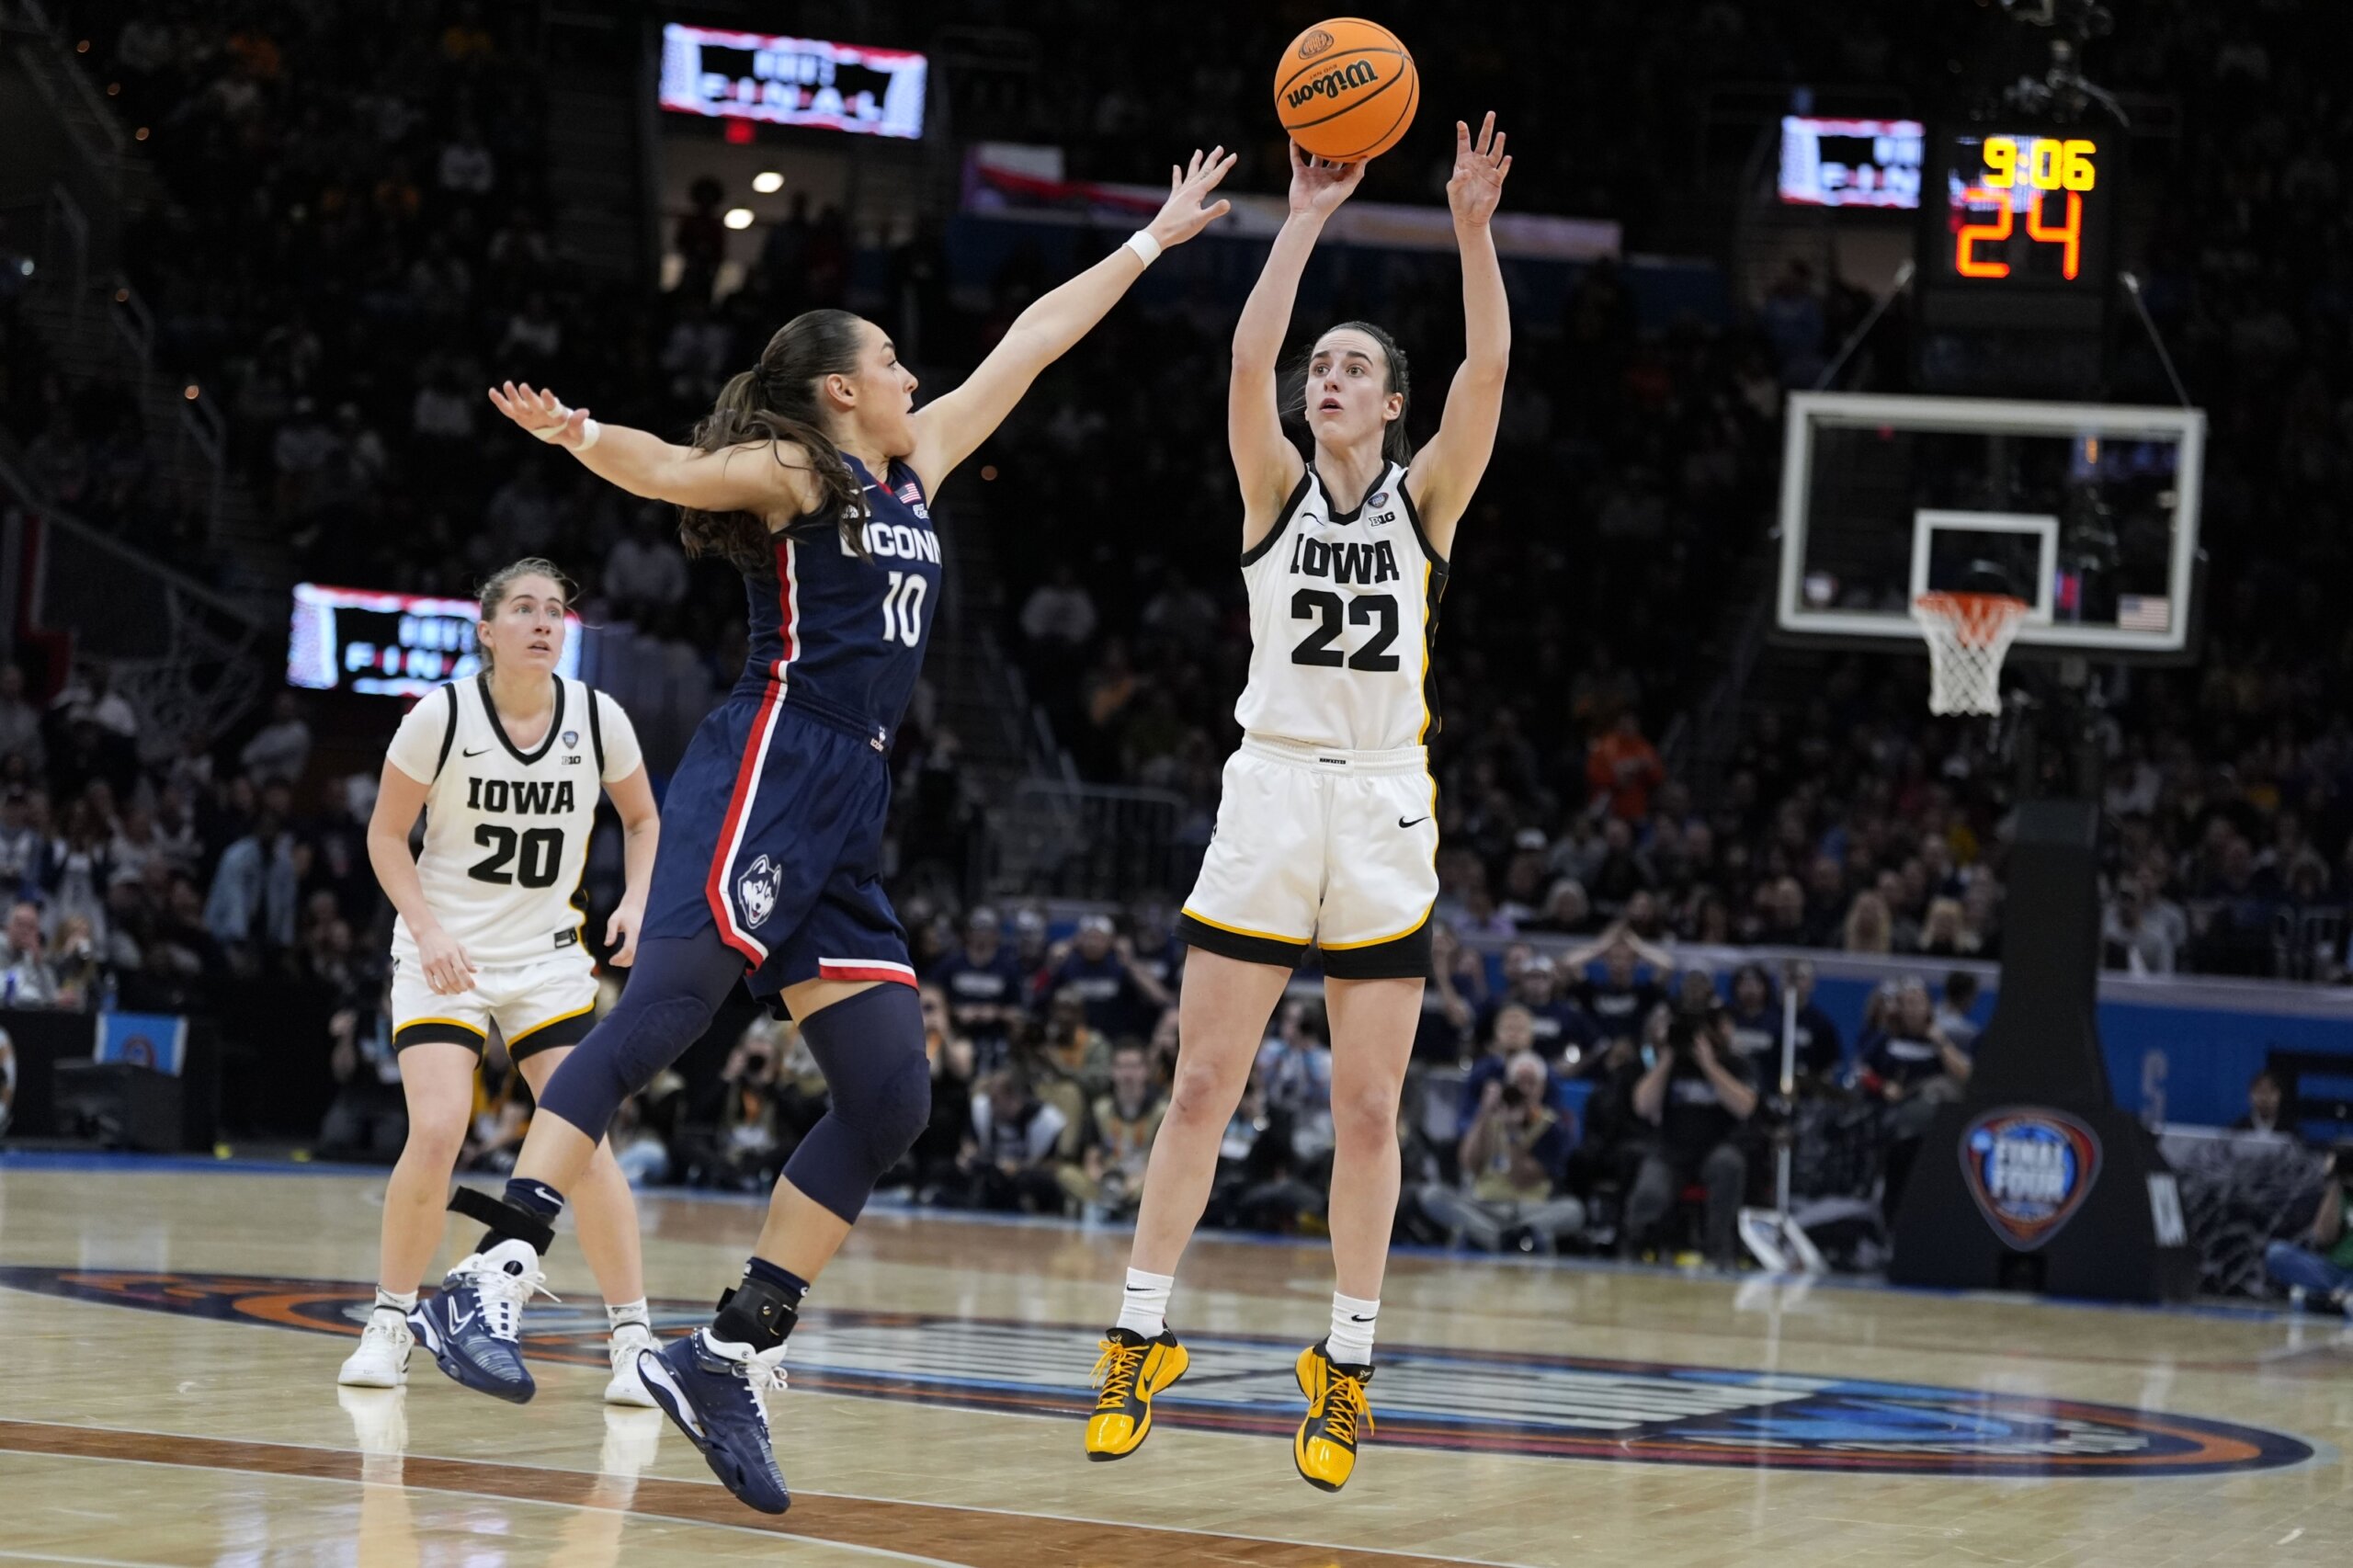 Caitlin Clark leads Iowa rally for 7169 win over UConn in women’s